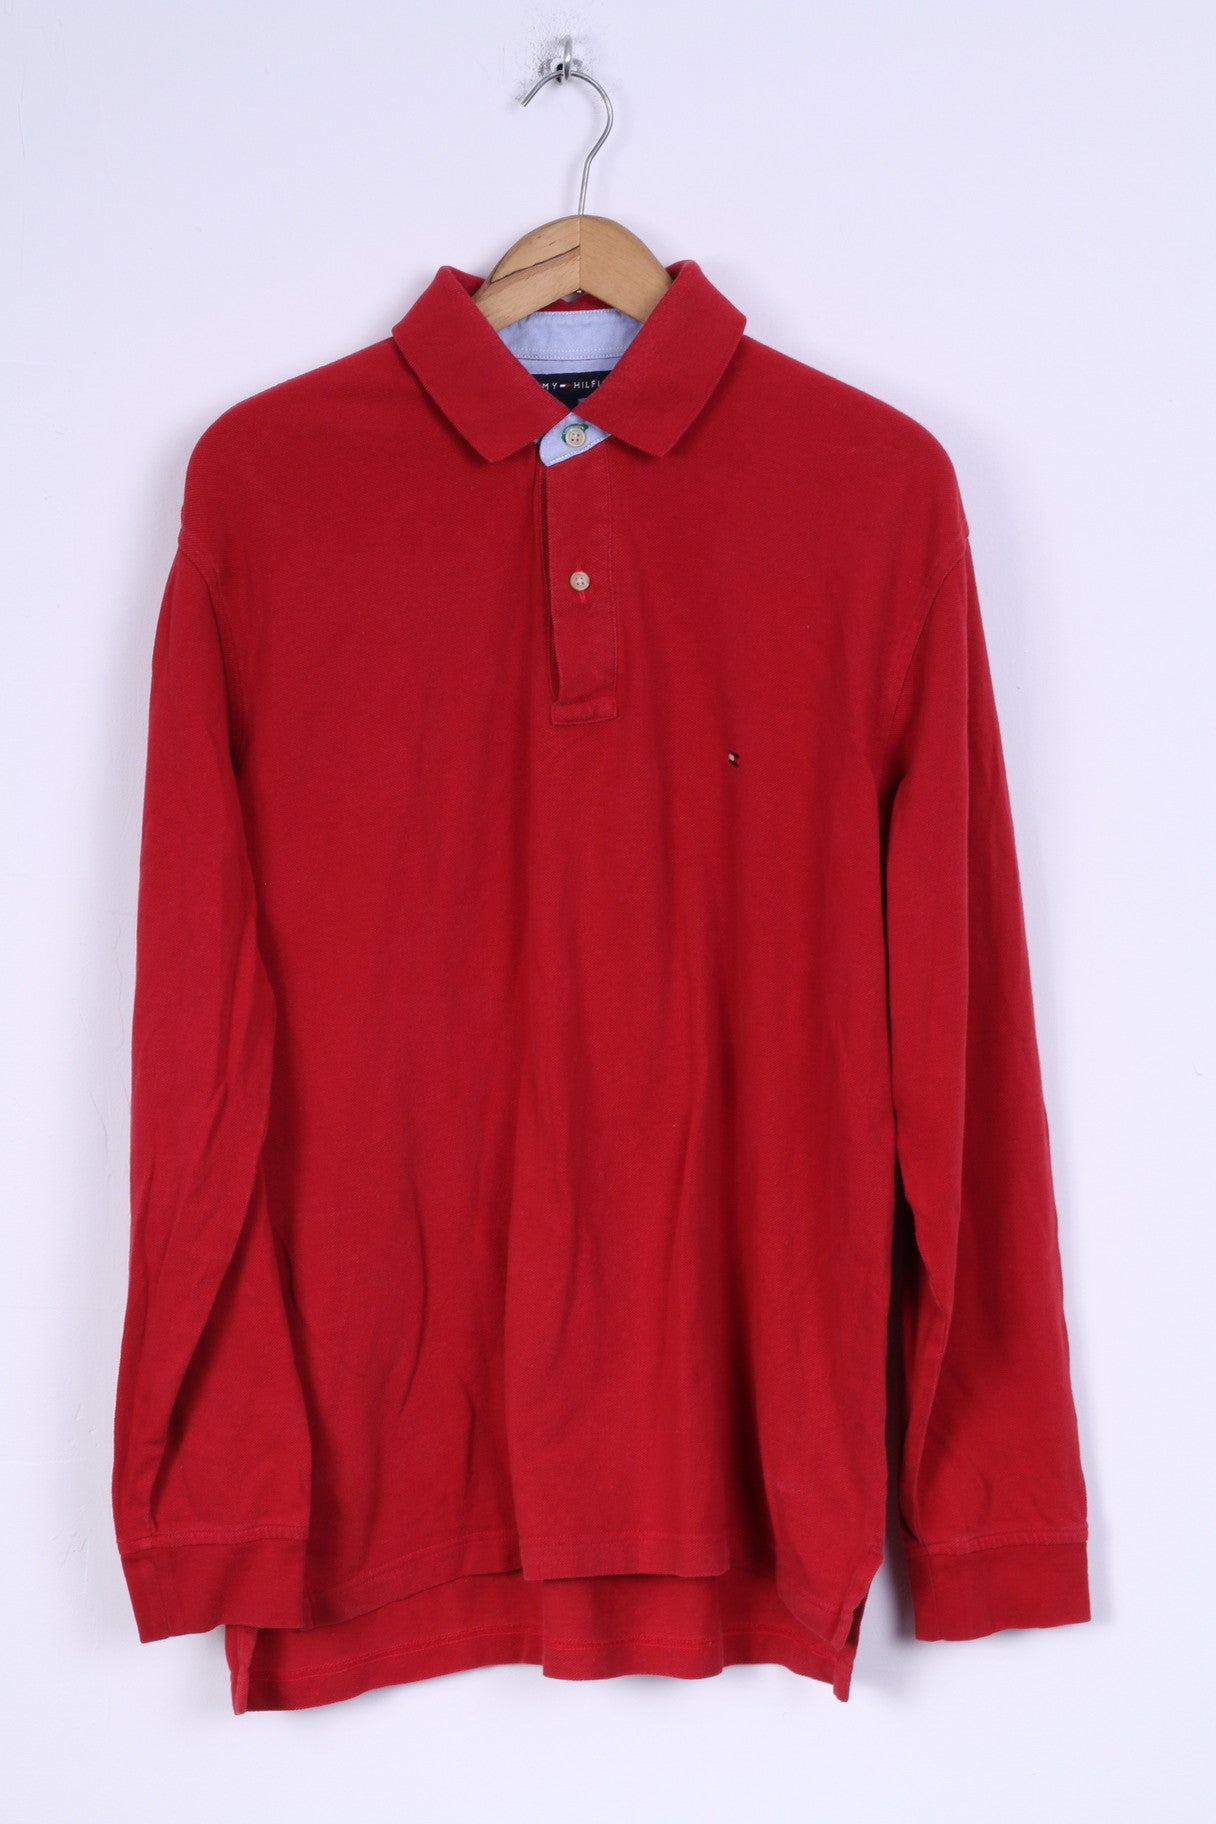 Tommy Hilfiger Mens L Polo Shirt Long Sleeved Red Cotton Top